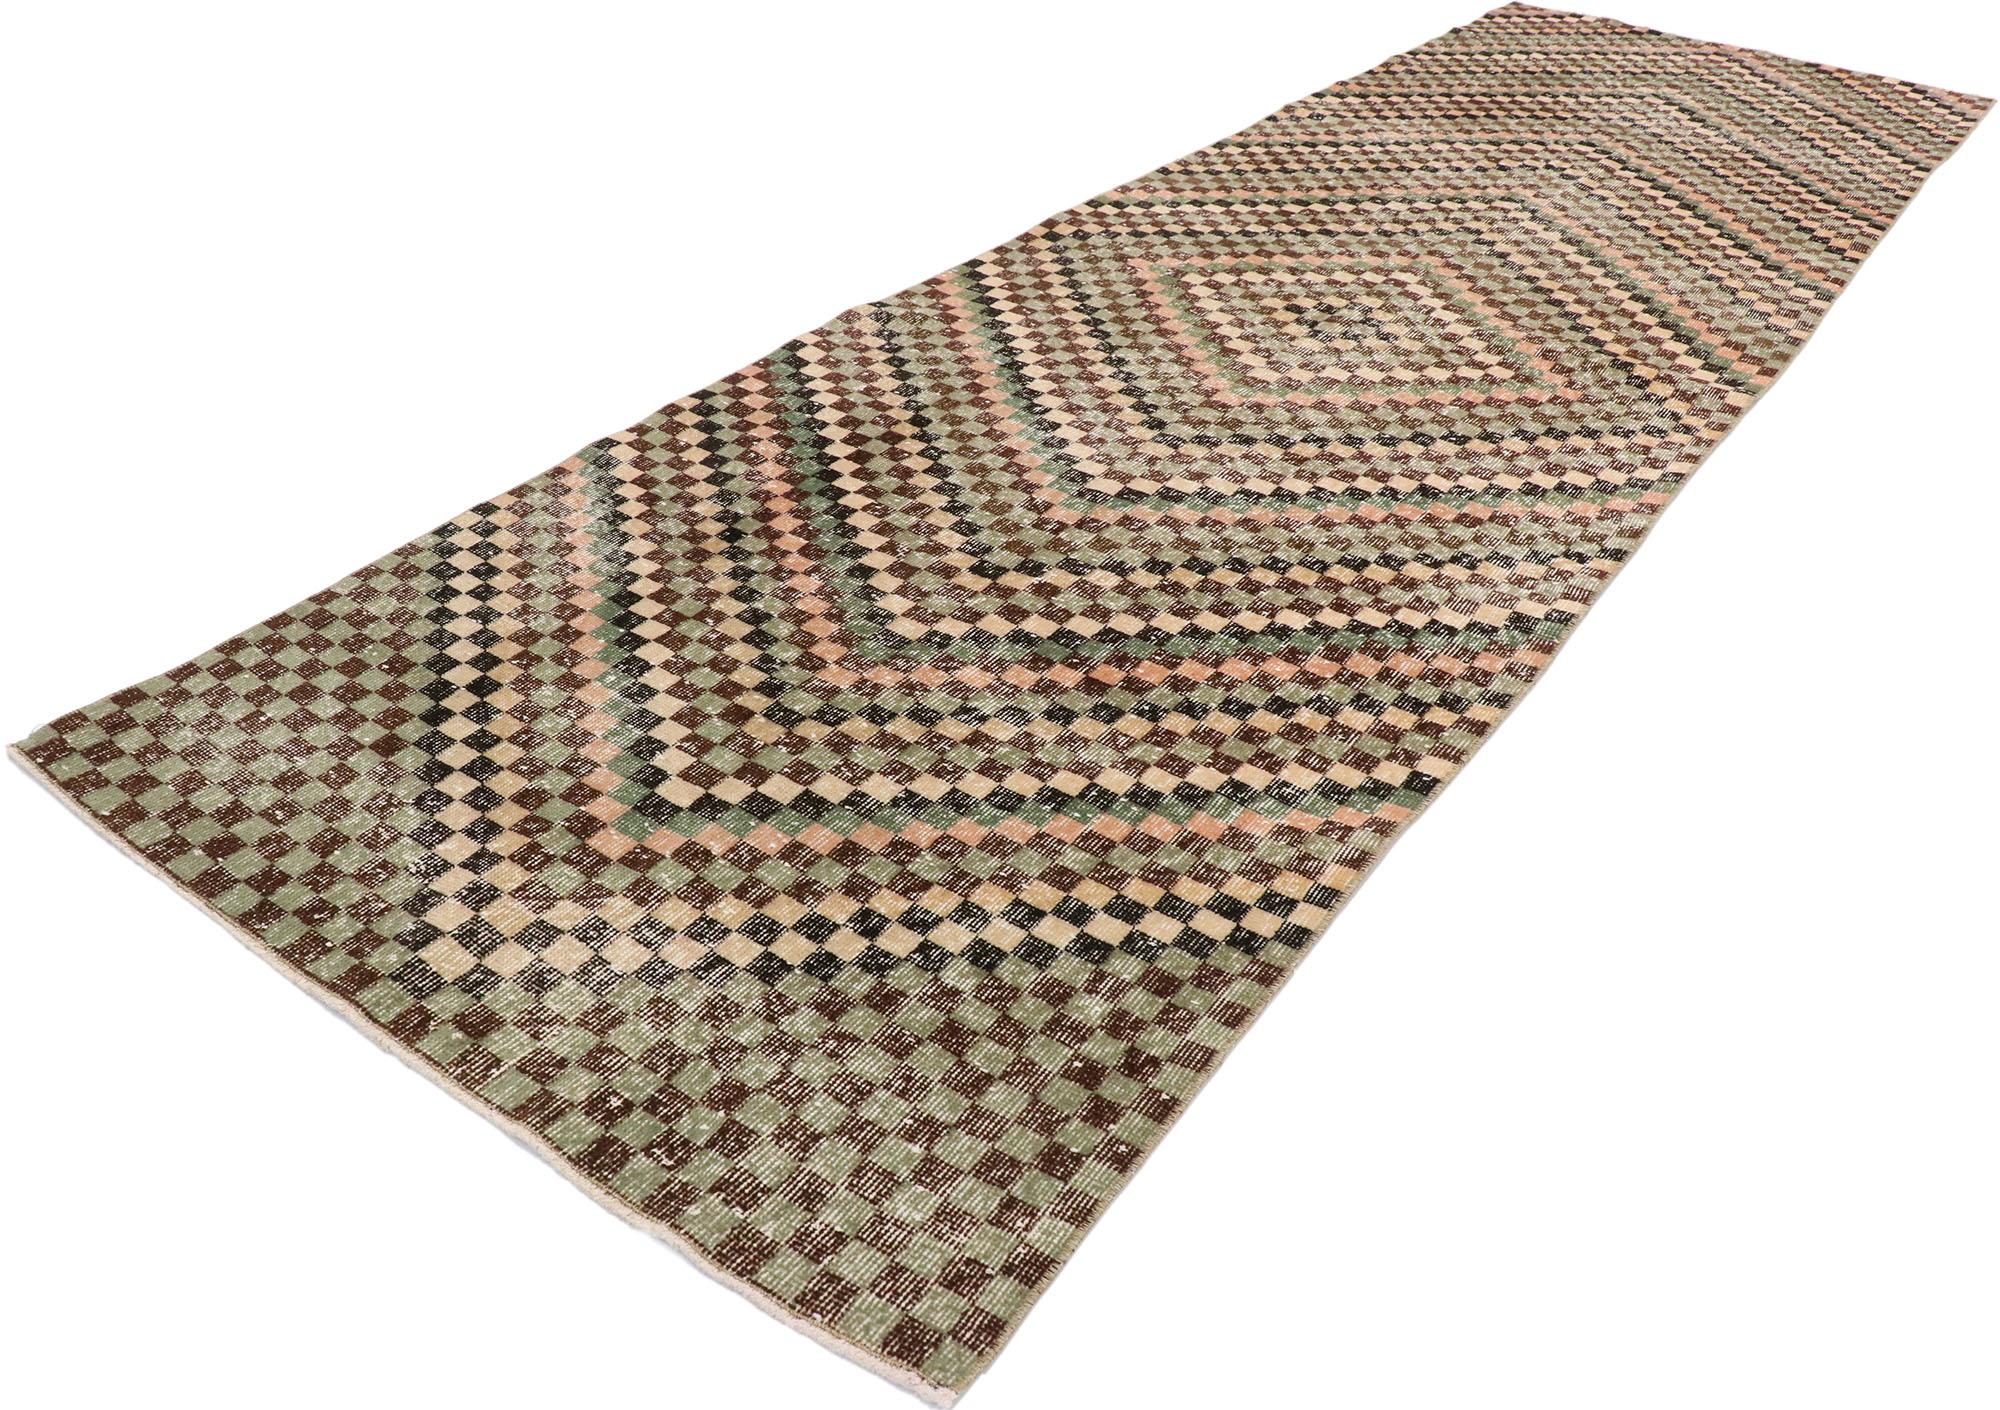 53364, distressed vintage Turkish Sivas runner with rustic Mid-Century Modern Cubist style. This hand knotted wool distressed vintage Turkish Sivas rug features an all-over checkered diamond pattern comprised of rows of multi-colored cubes. Each row